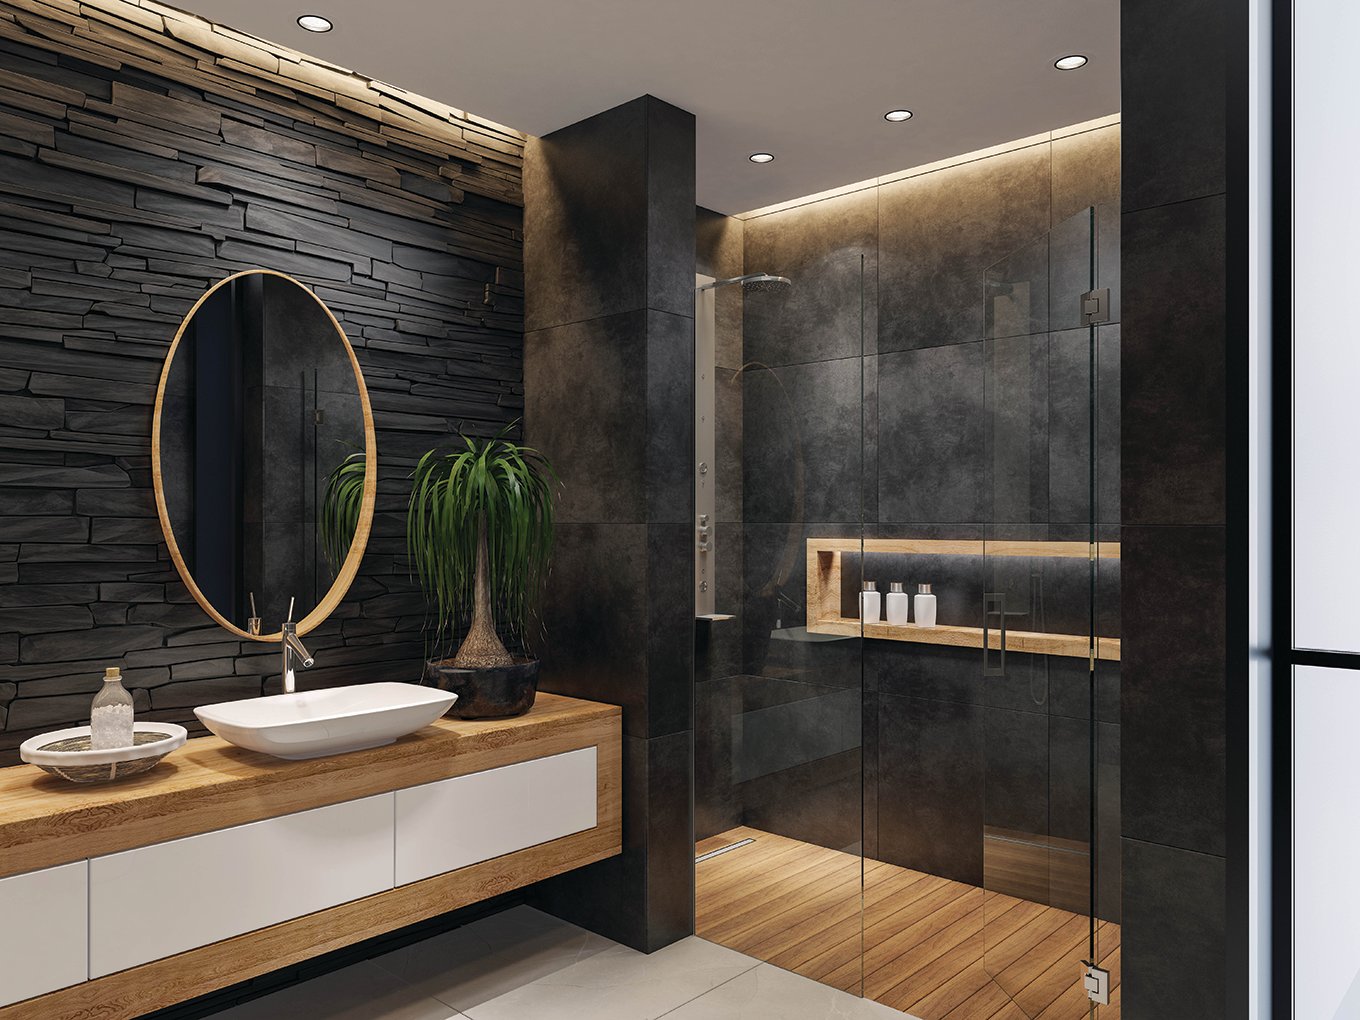 This is definitely a higher-end bathroom remodel, with a variety of elegant tile and stone.